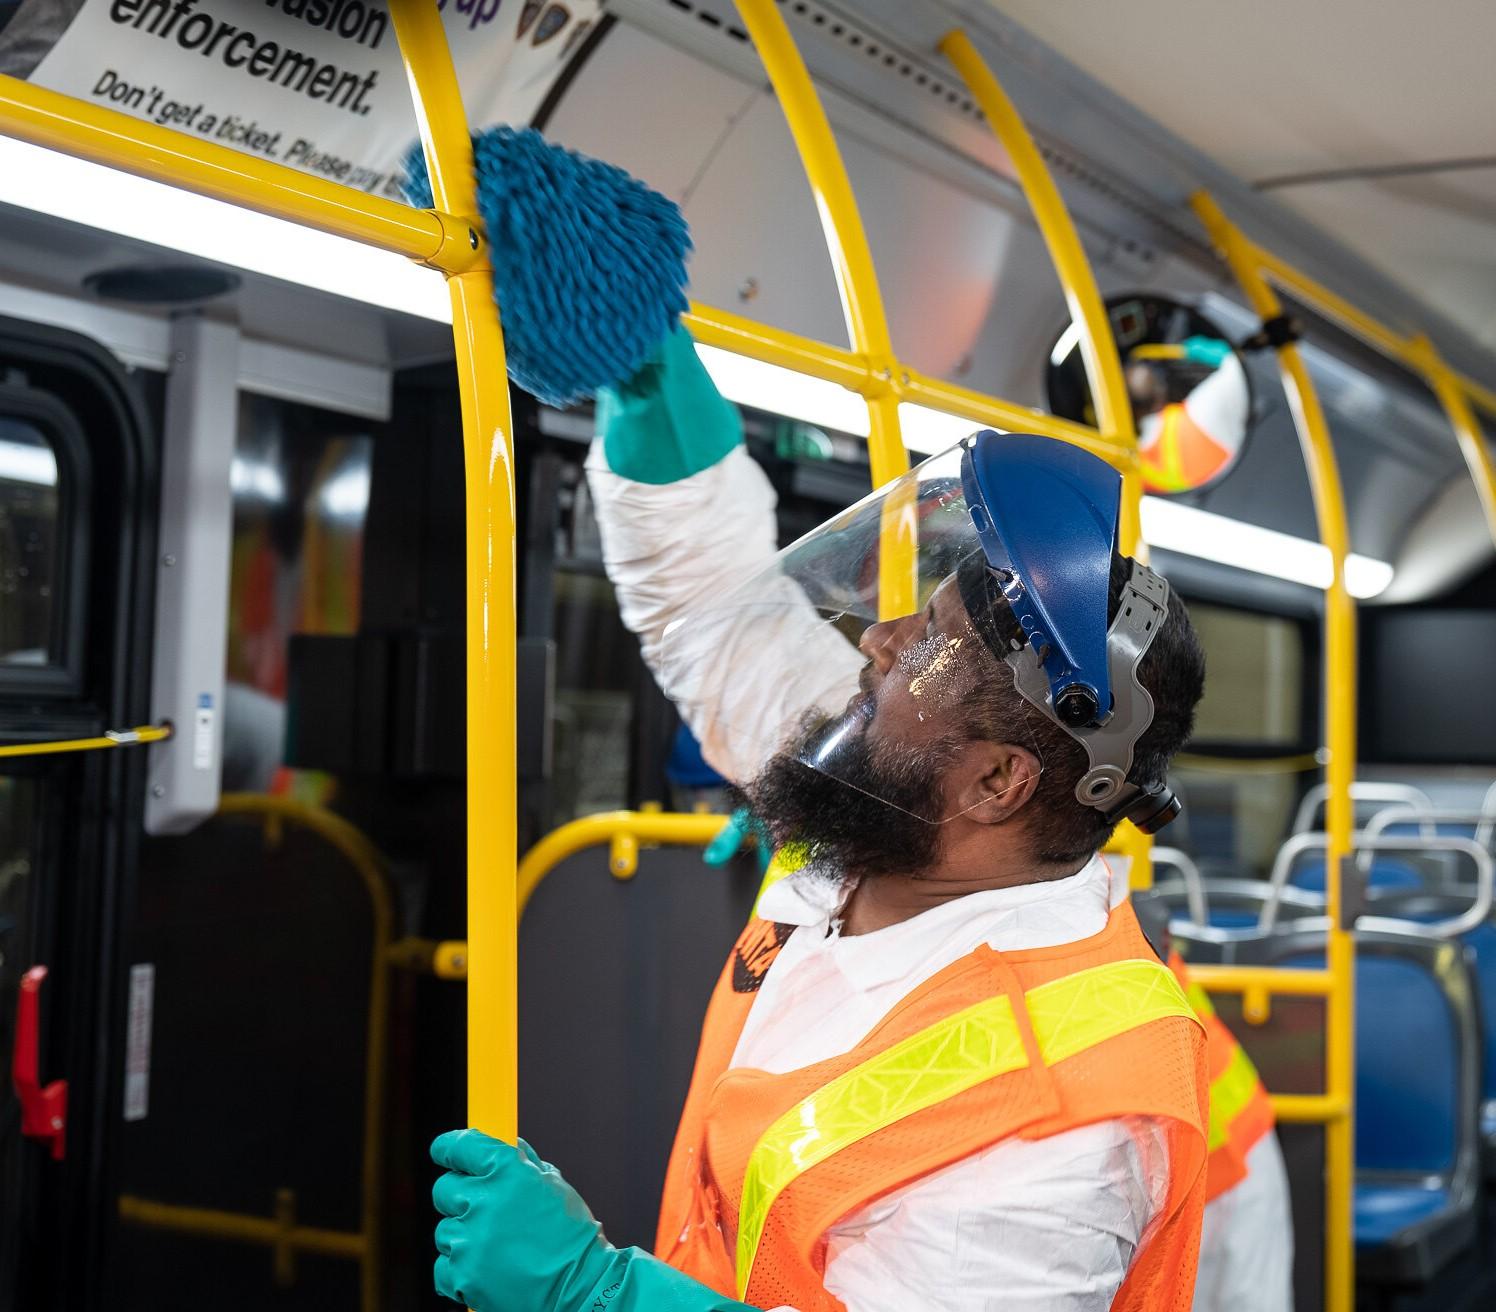 Bus disinfection wiping